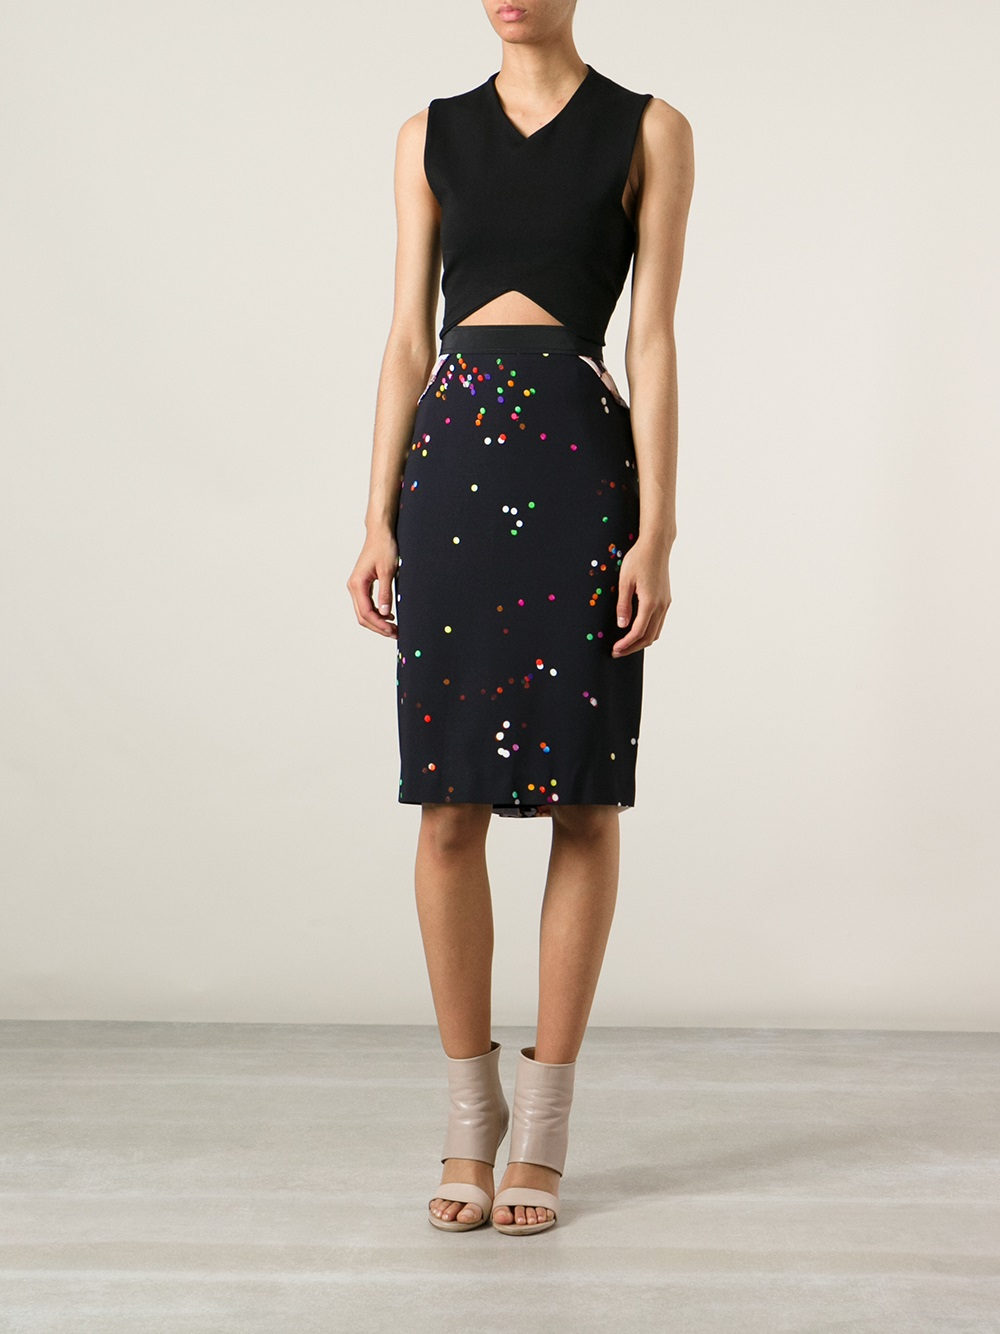 Lyst - Givenchy Printed Design Skirt in Black